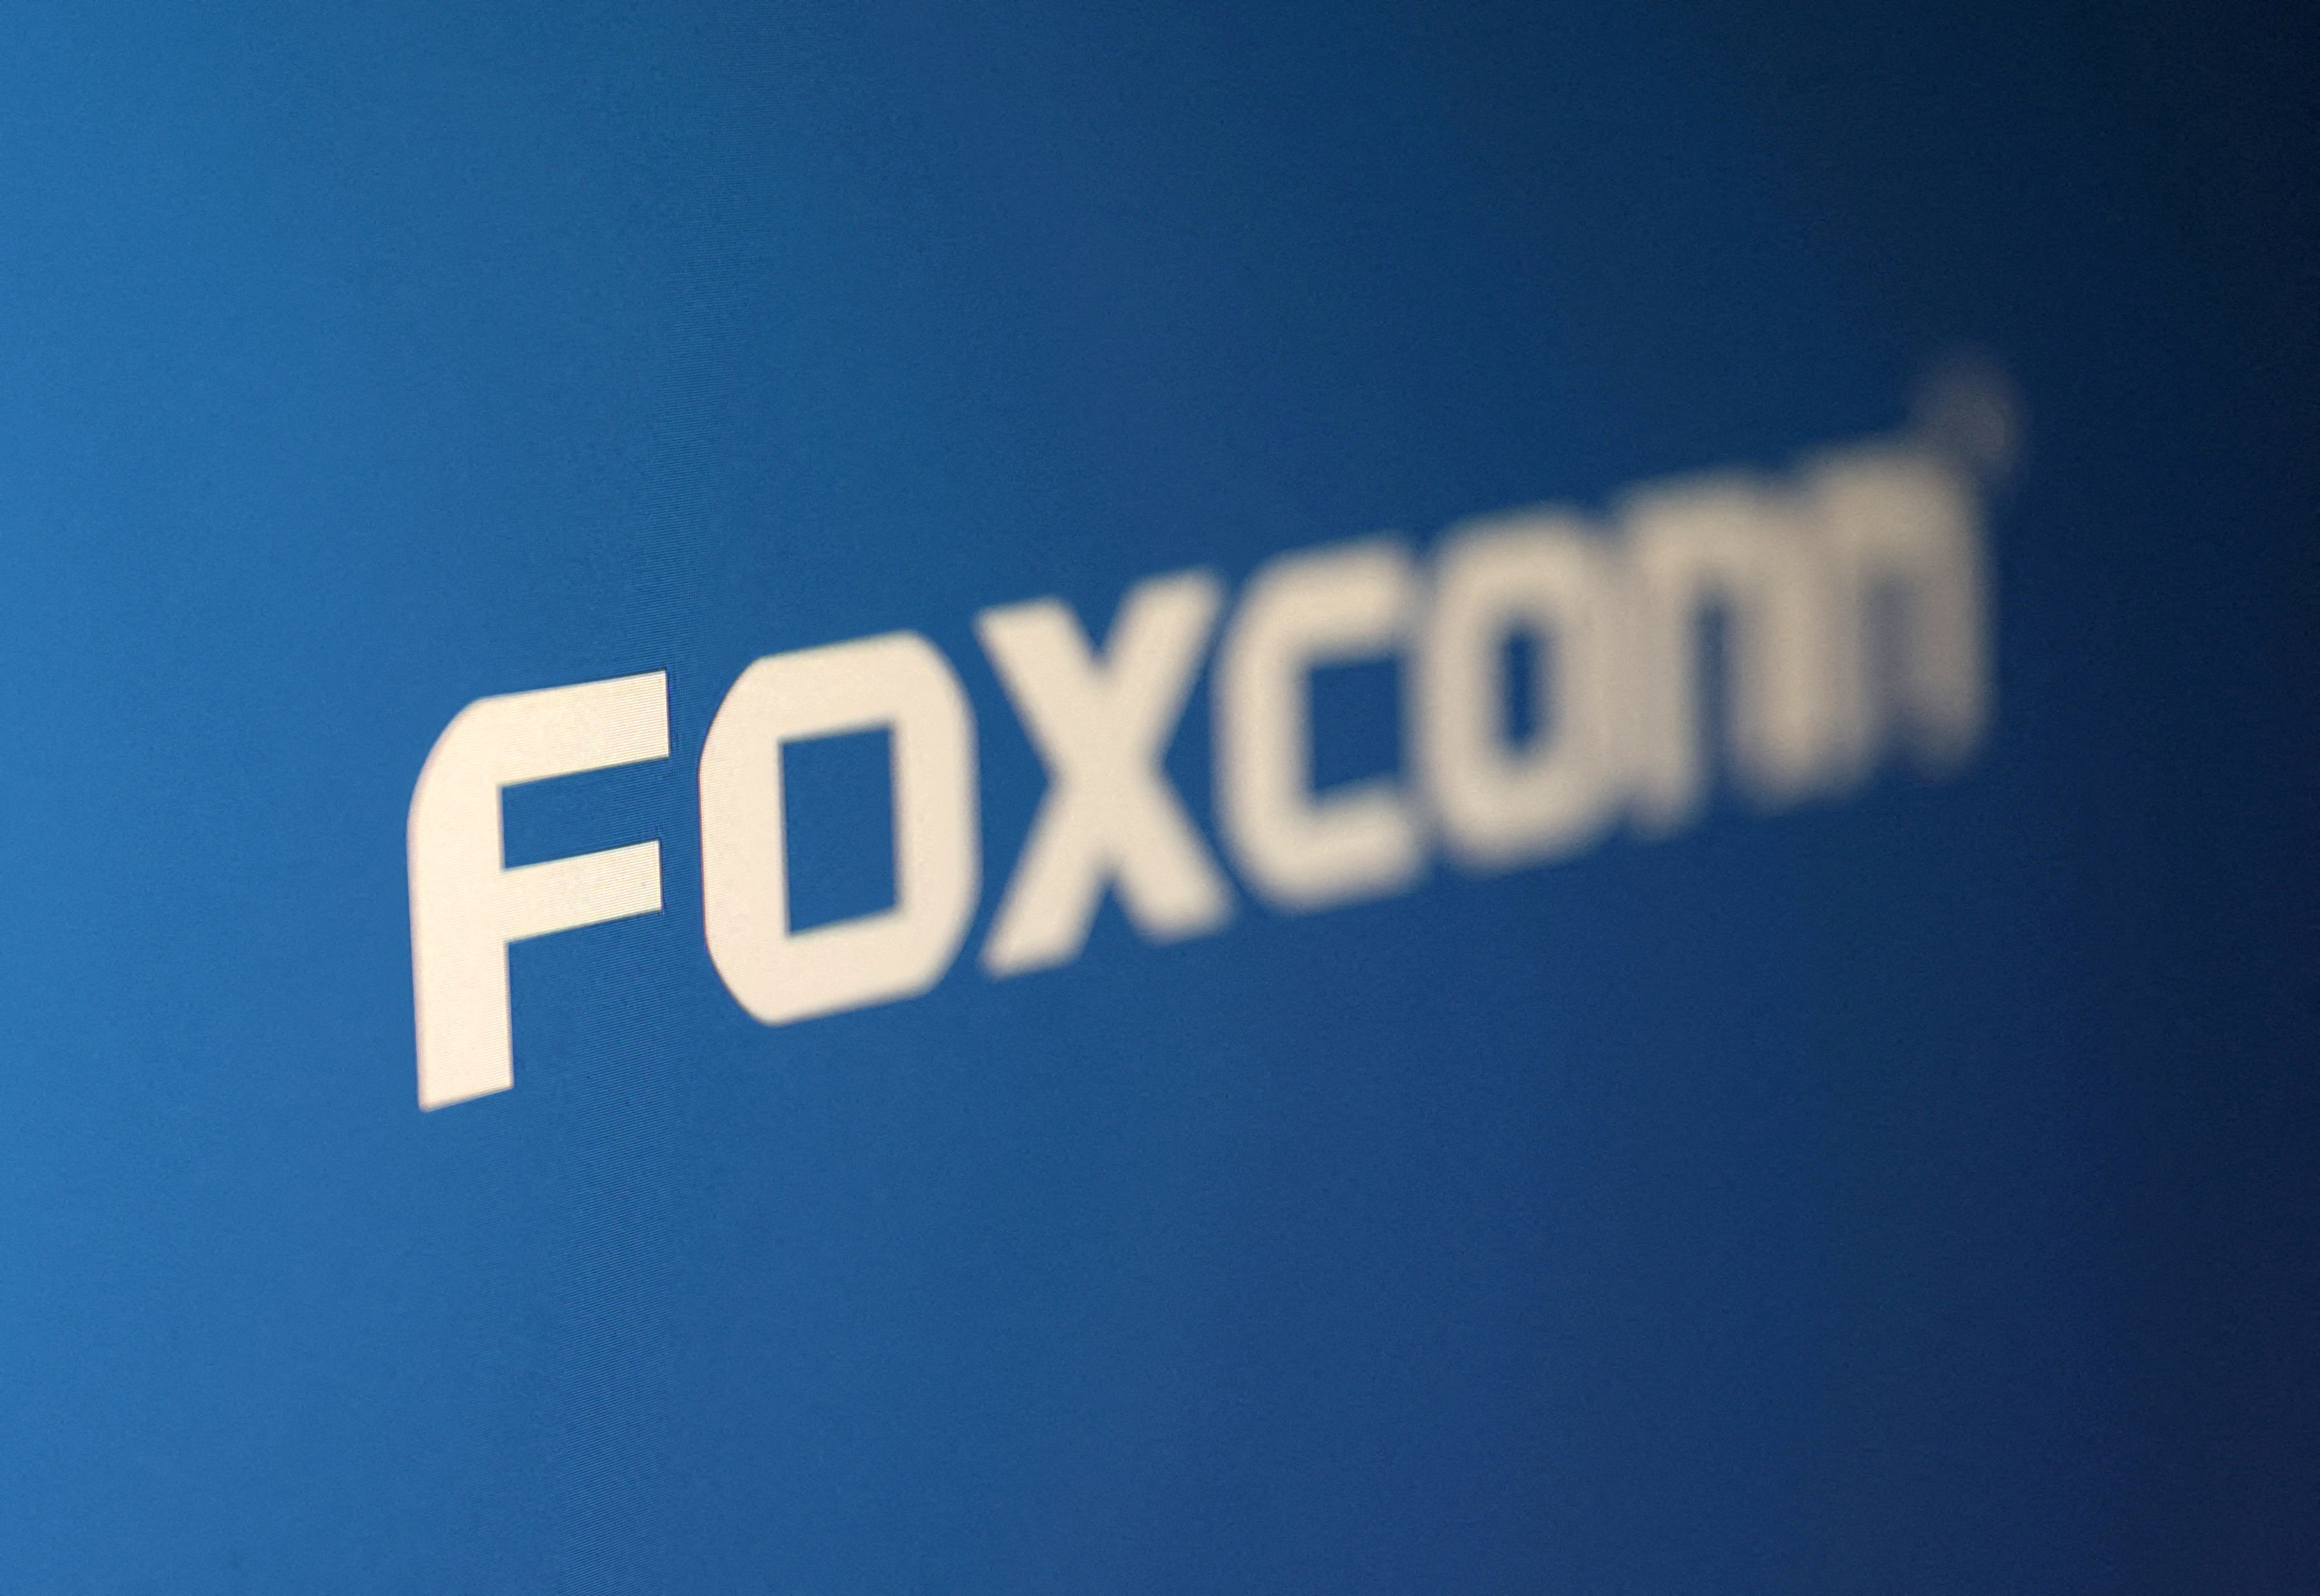 The Foxconn logo is seen in this illustration